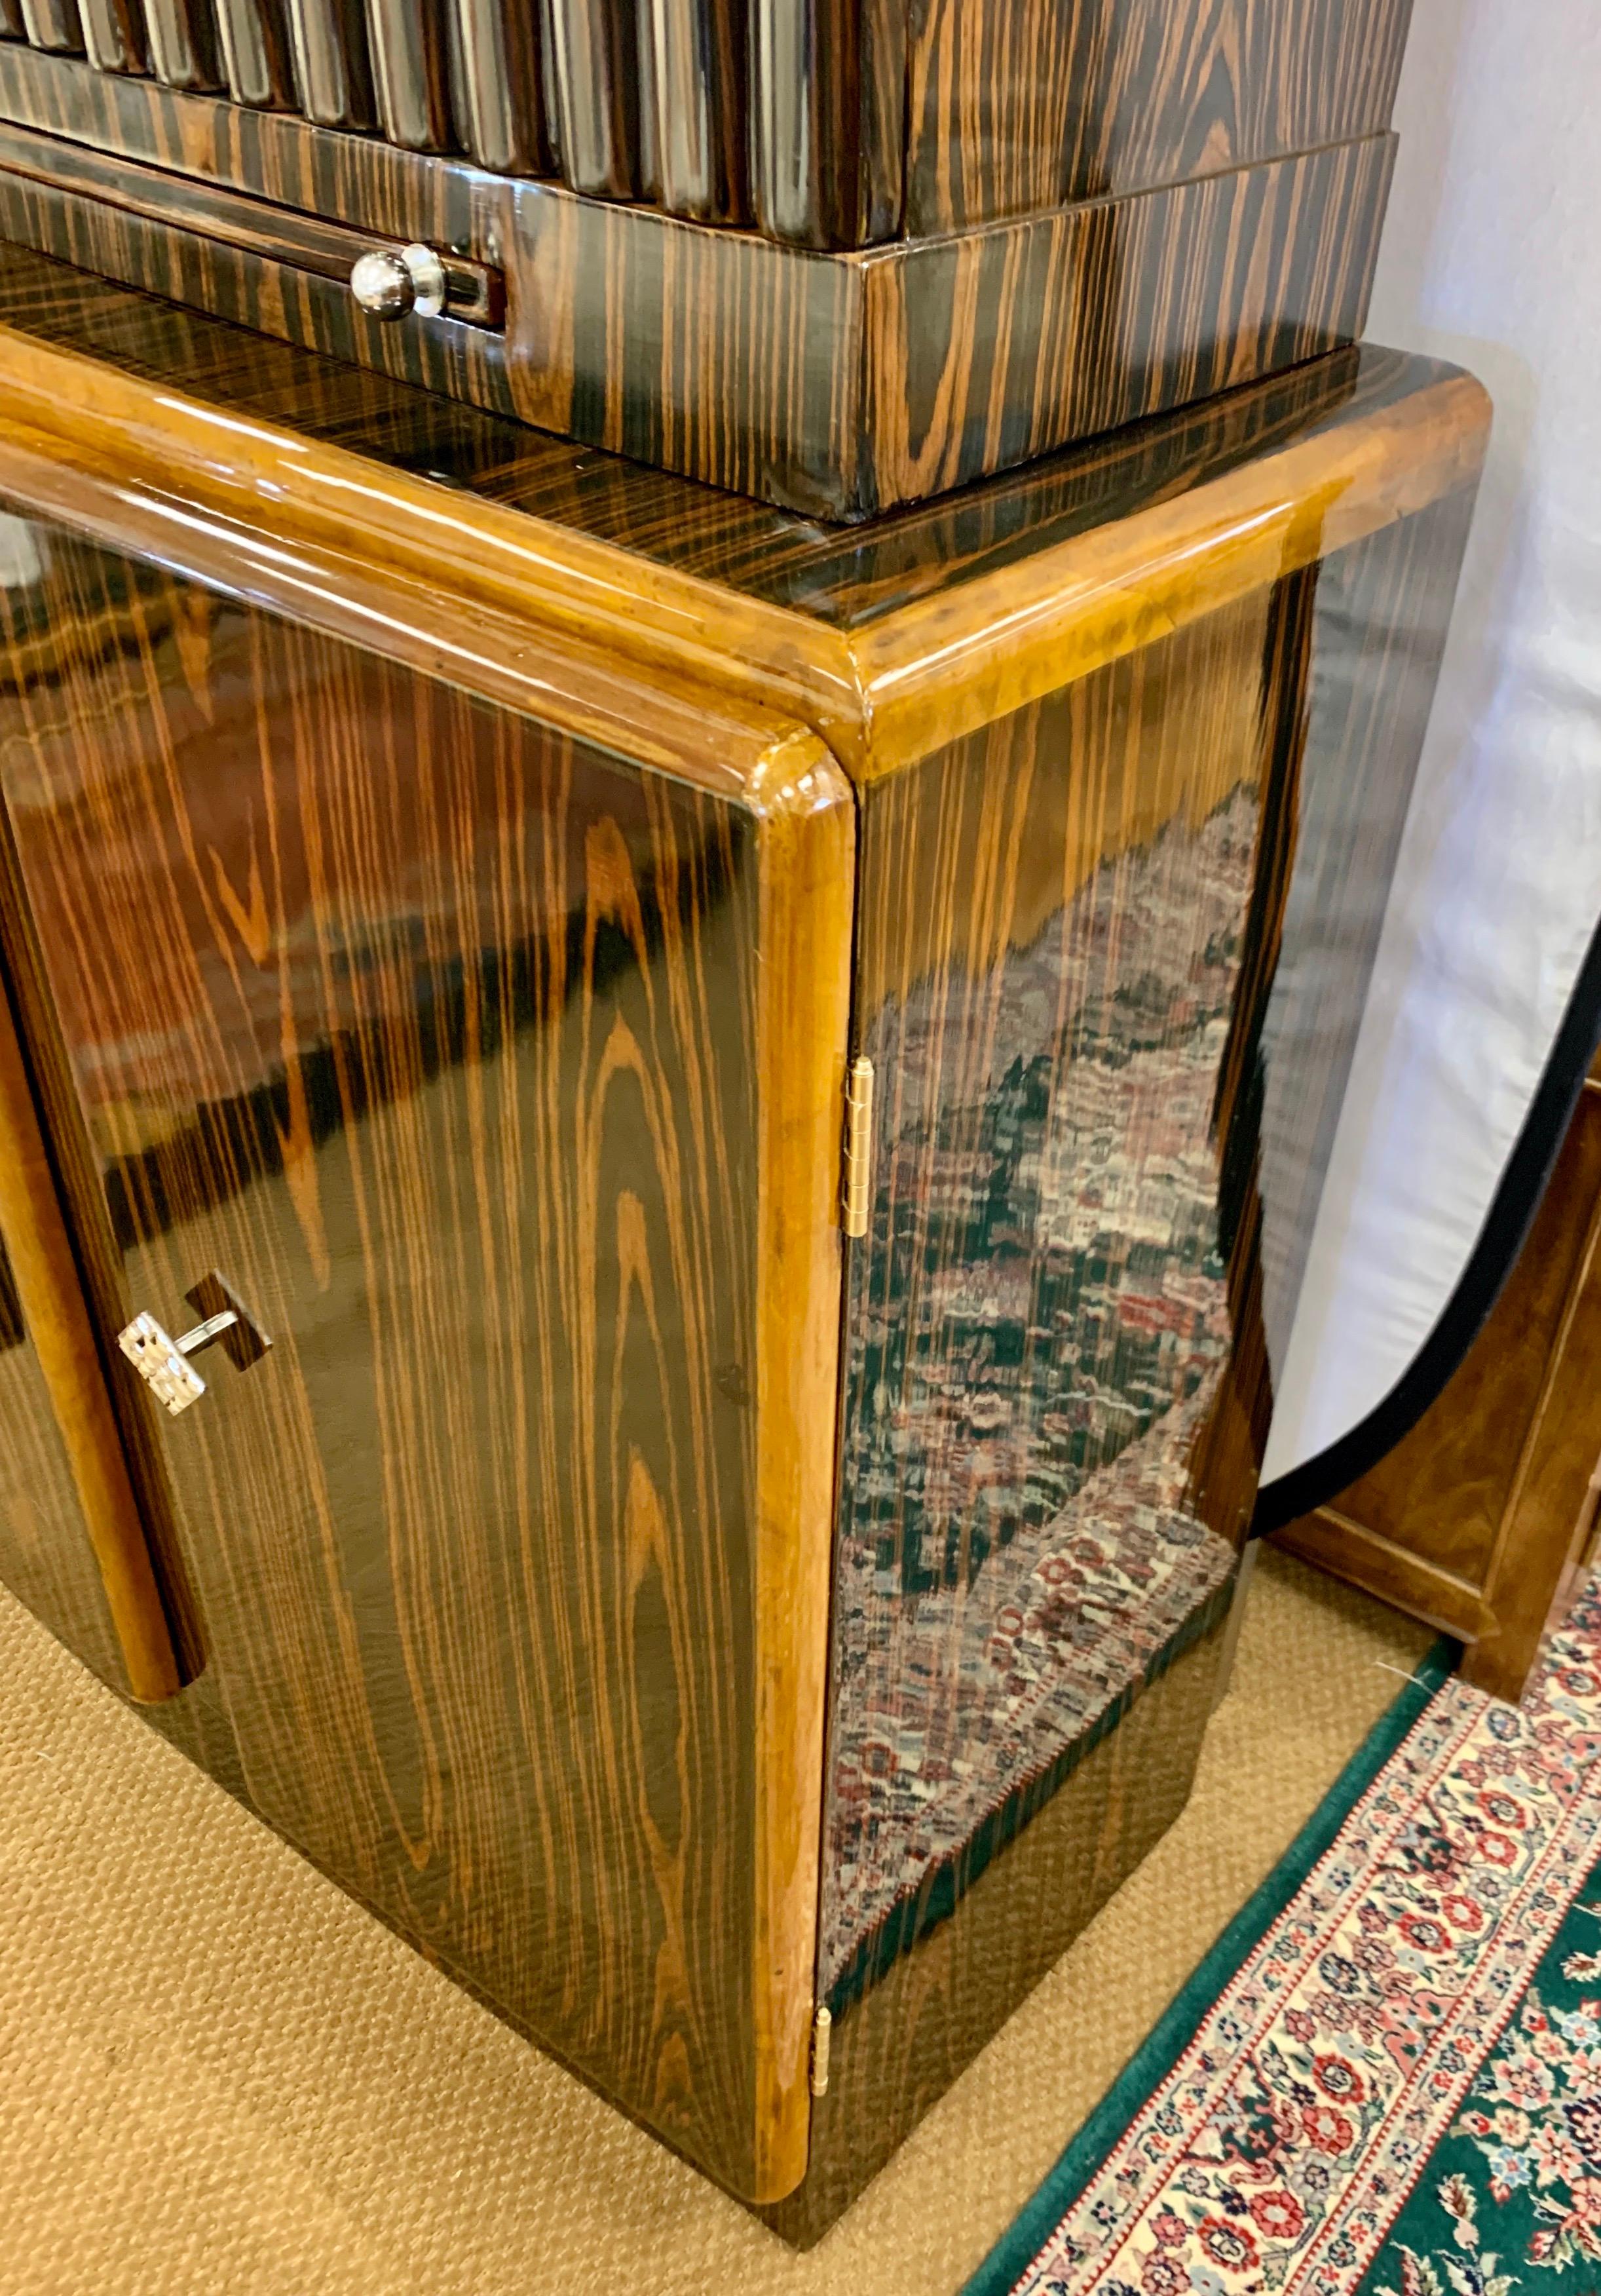 Swank and coveted Art Deco style bar where top has mirrored interior and bottom has ample storage.
See pics. Features Macassar wood and unusual metal hardware. Imported from Italy in the mid-20th century. Also features mirrored tray that pulls out